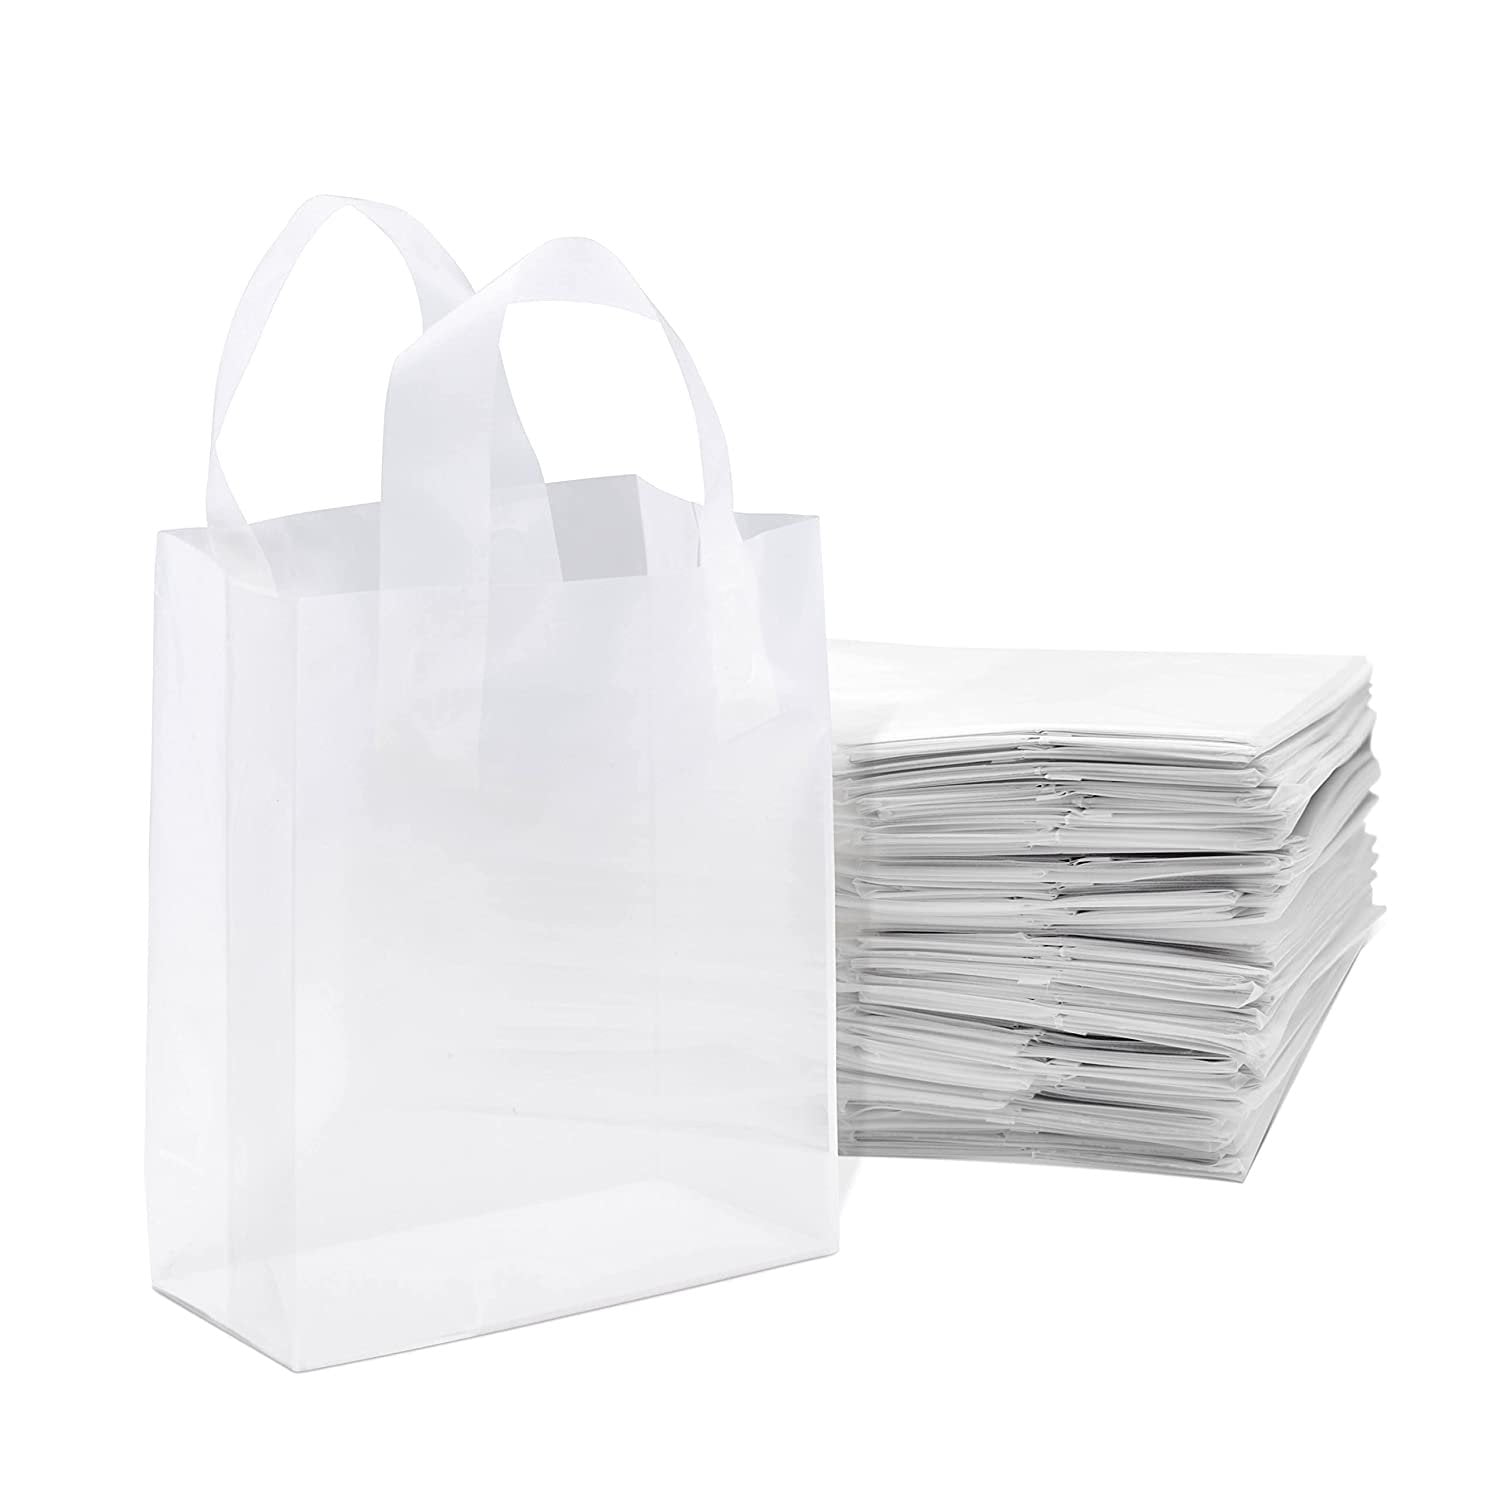 80 pack SMALL BROWN PAPER SOS CARRIER BAGS LUNCH TAKE AWAY DELIVERY BULK BUY UK 